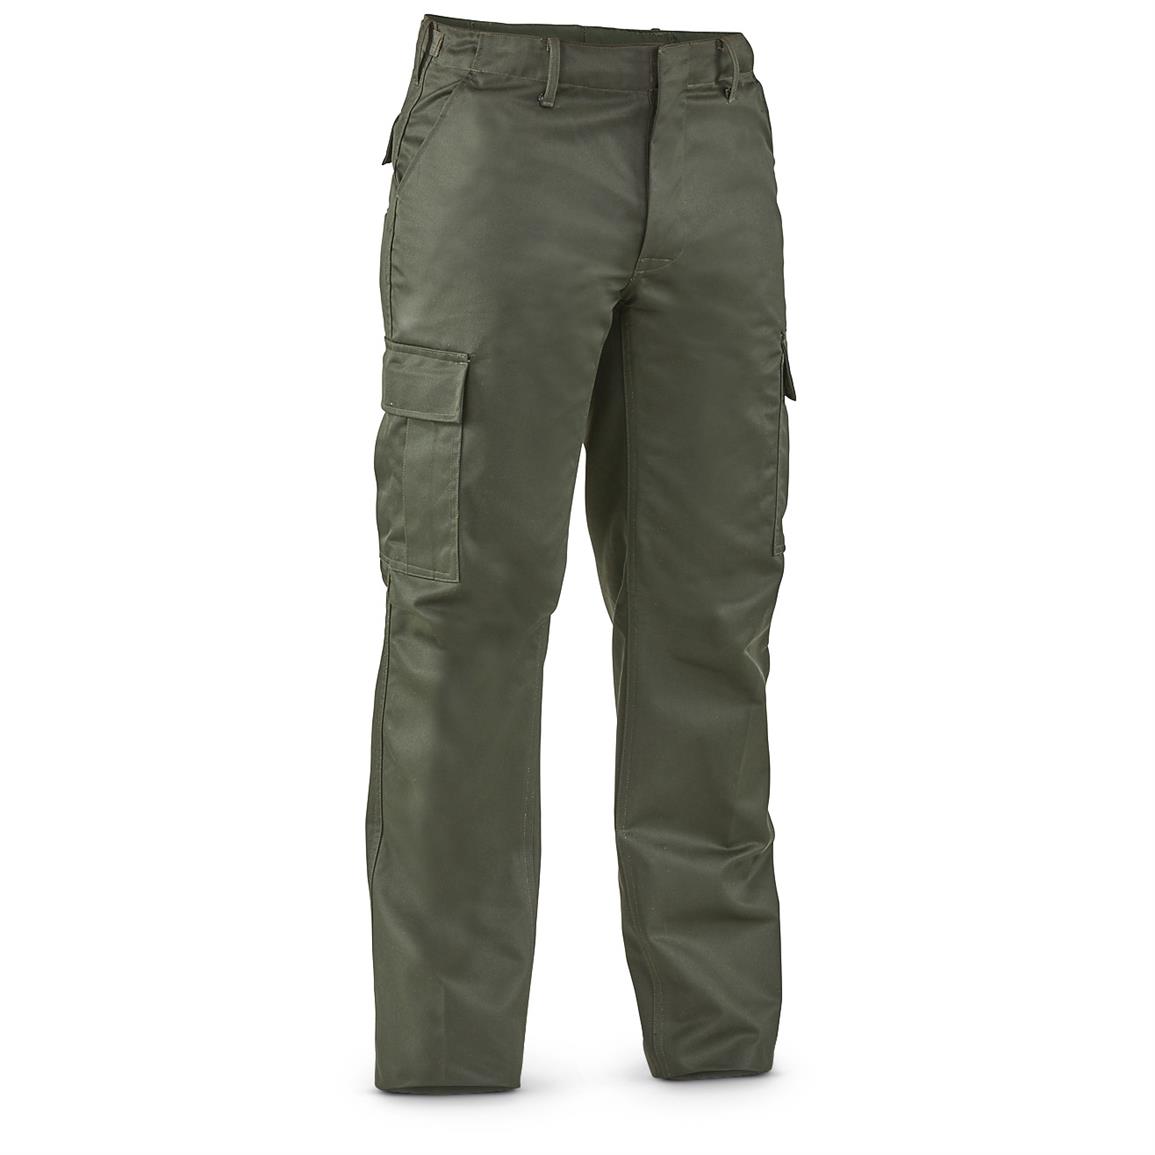 Special Unit BDU Trousers - 655376, Tactical Clothing at Sportsman's Guide